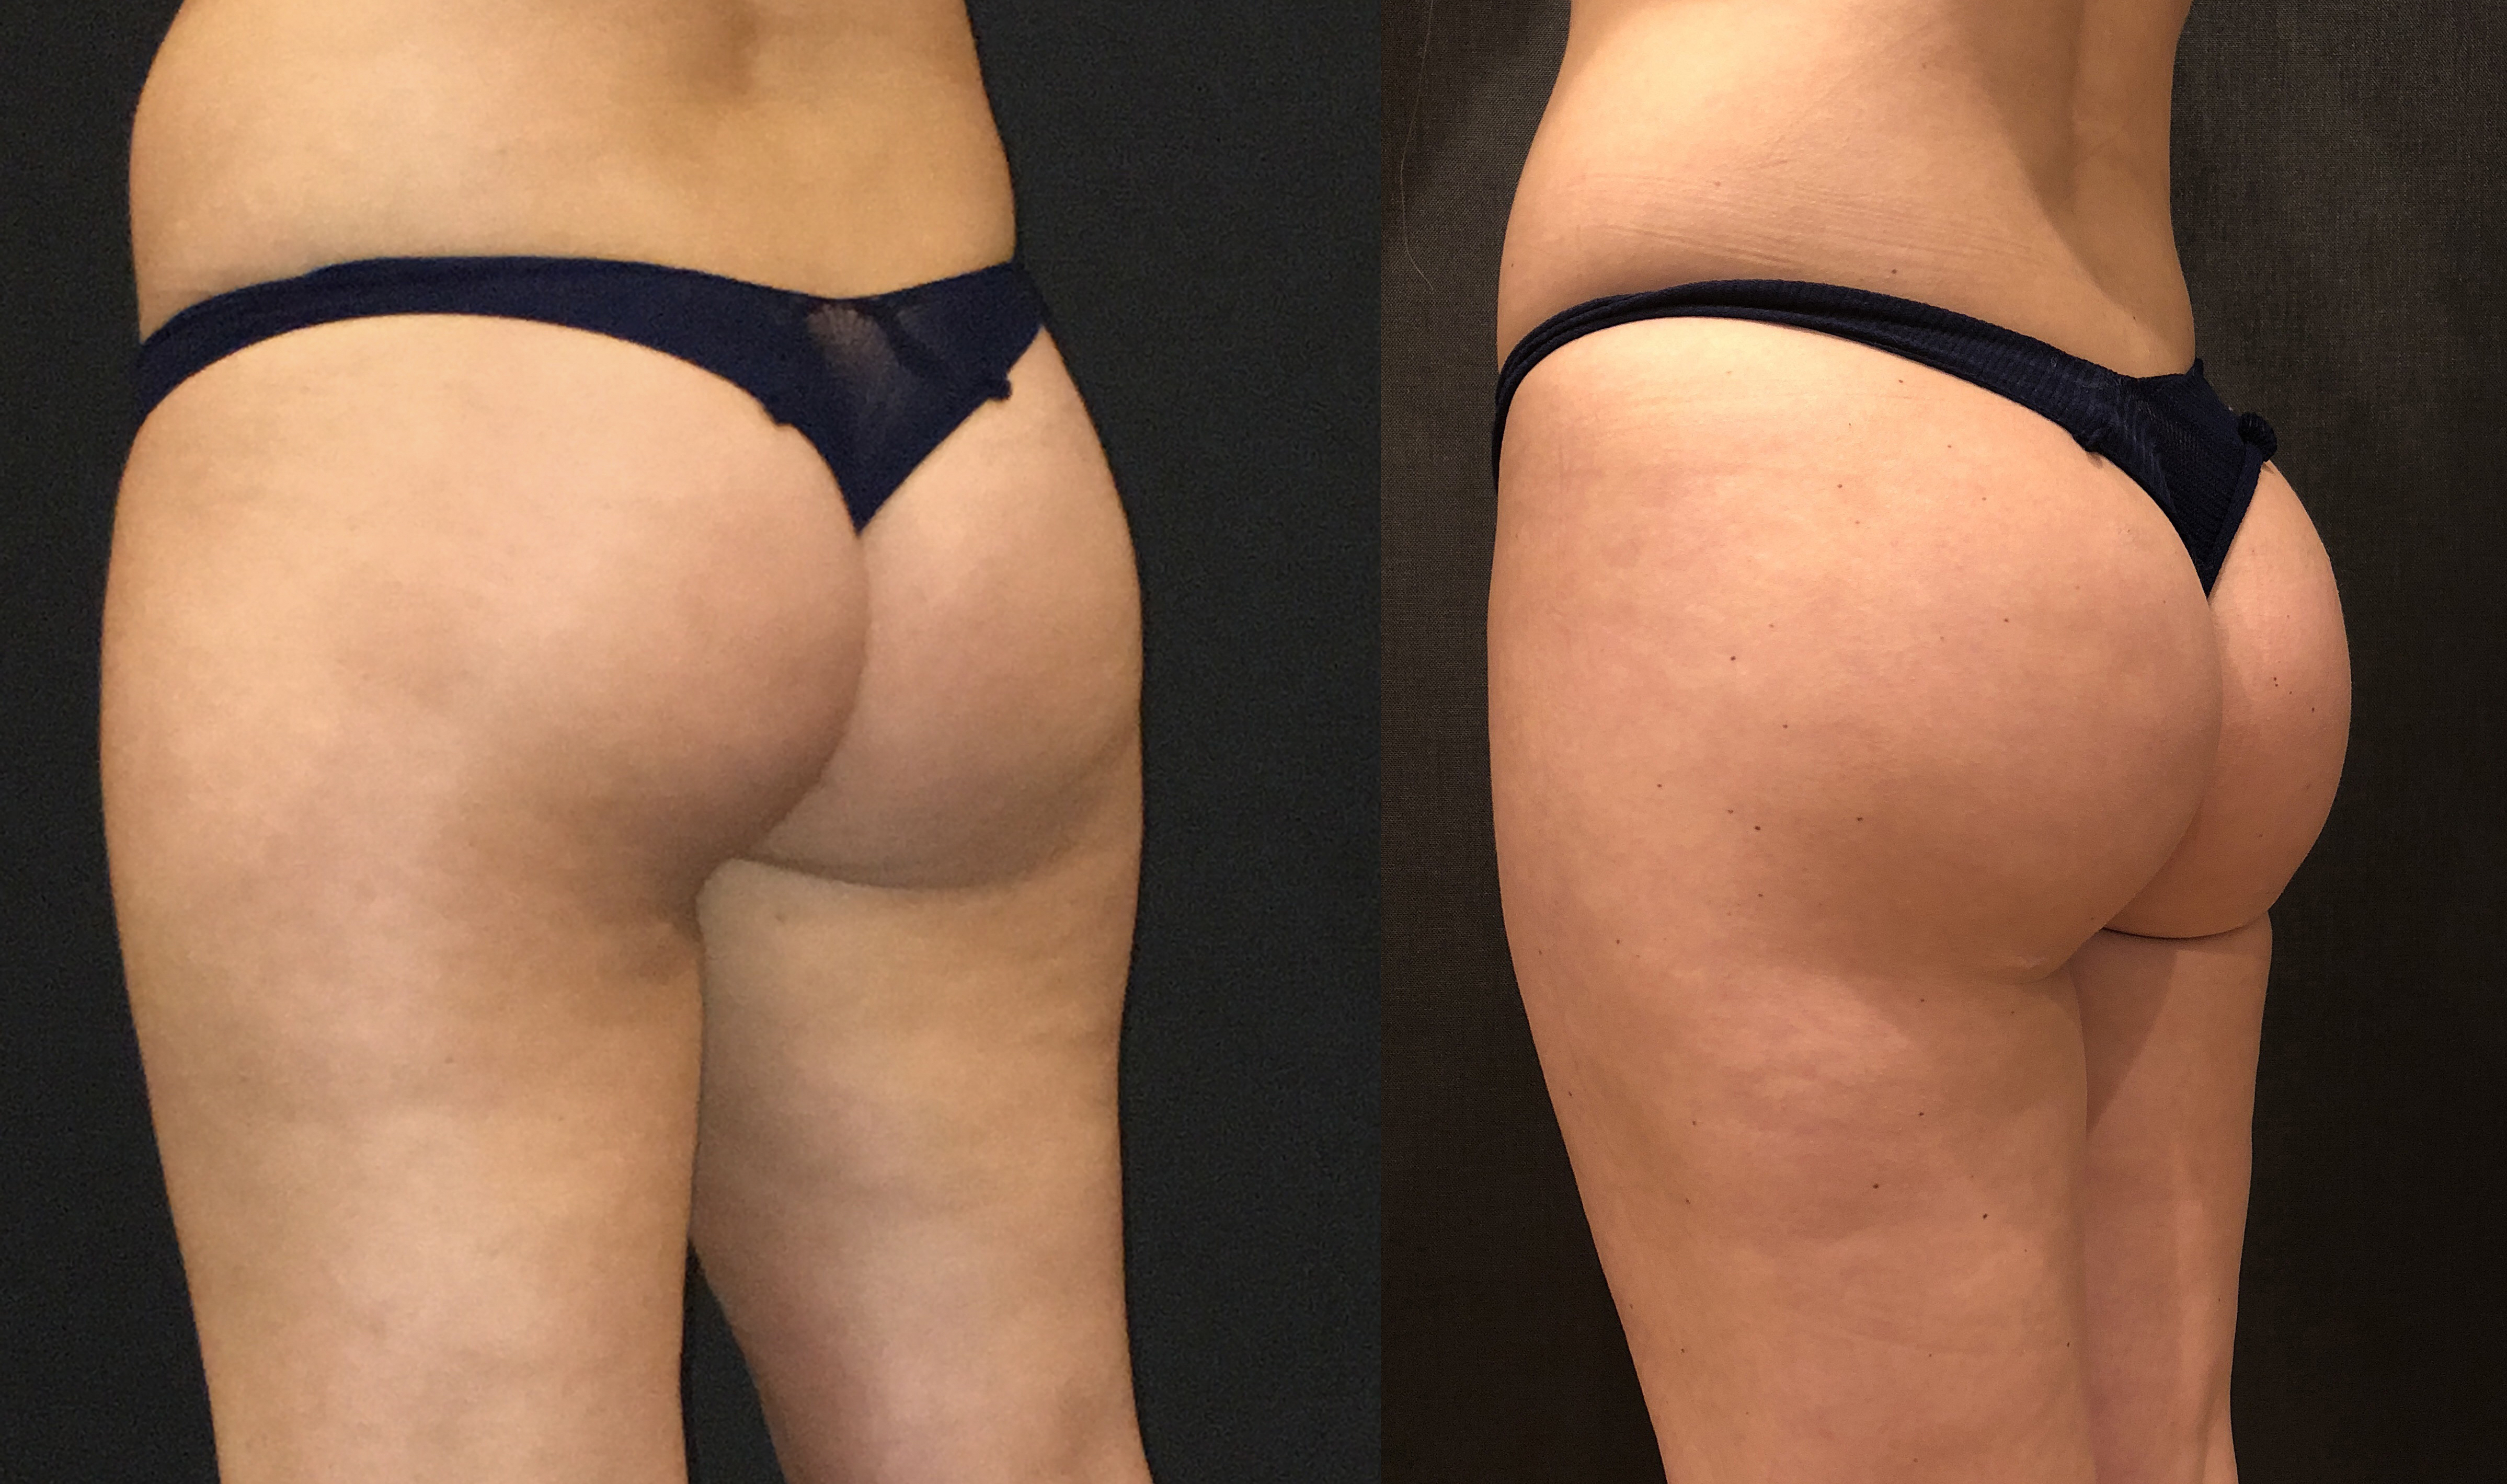 Tustin sculptra butt lift because nothing gets left behind